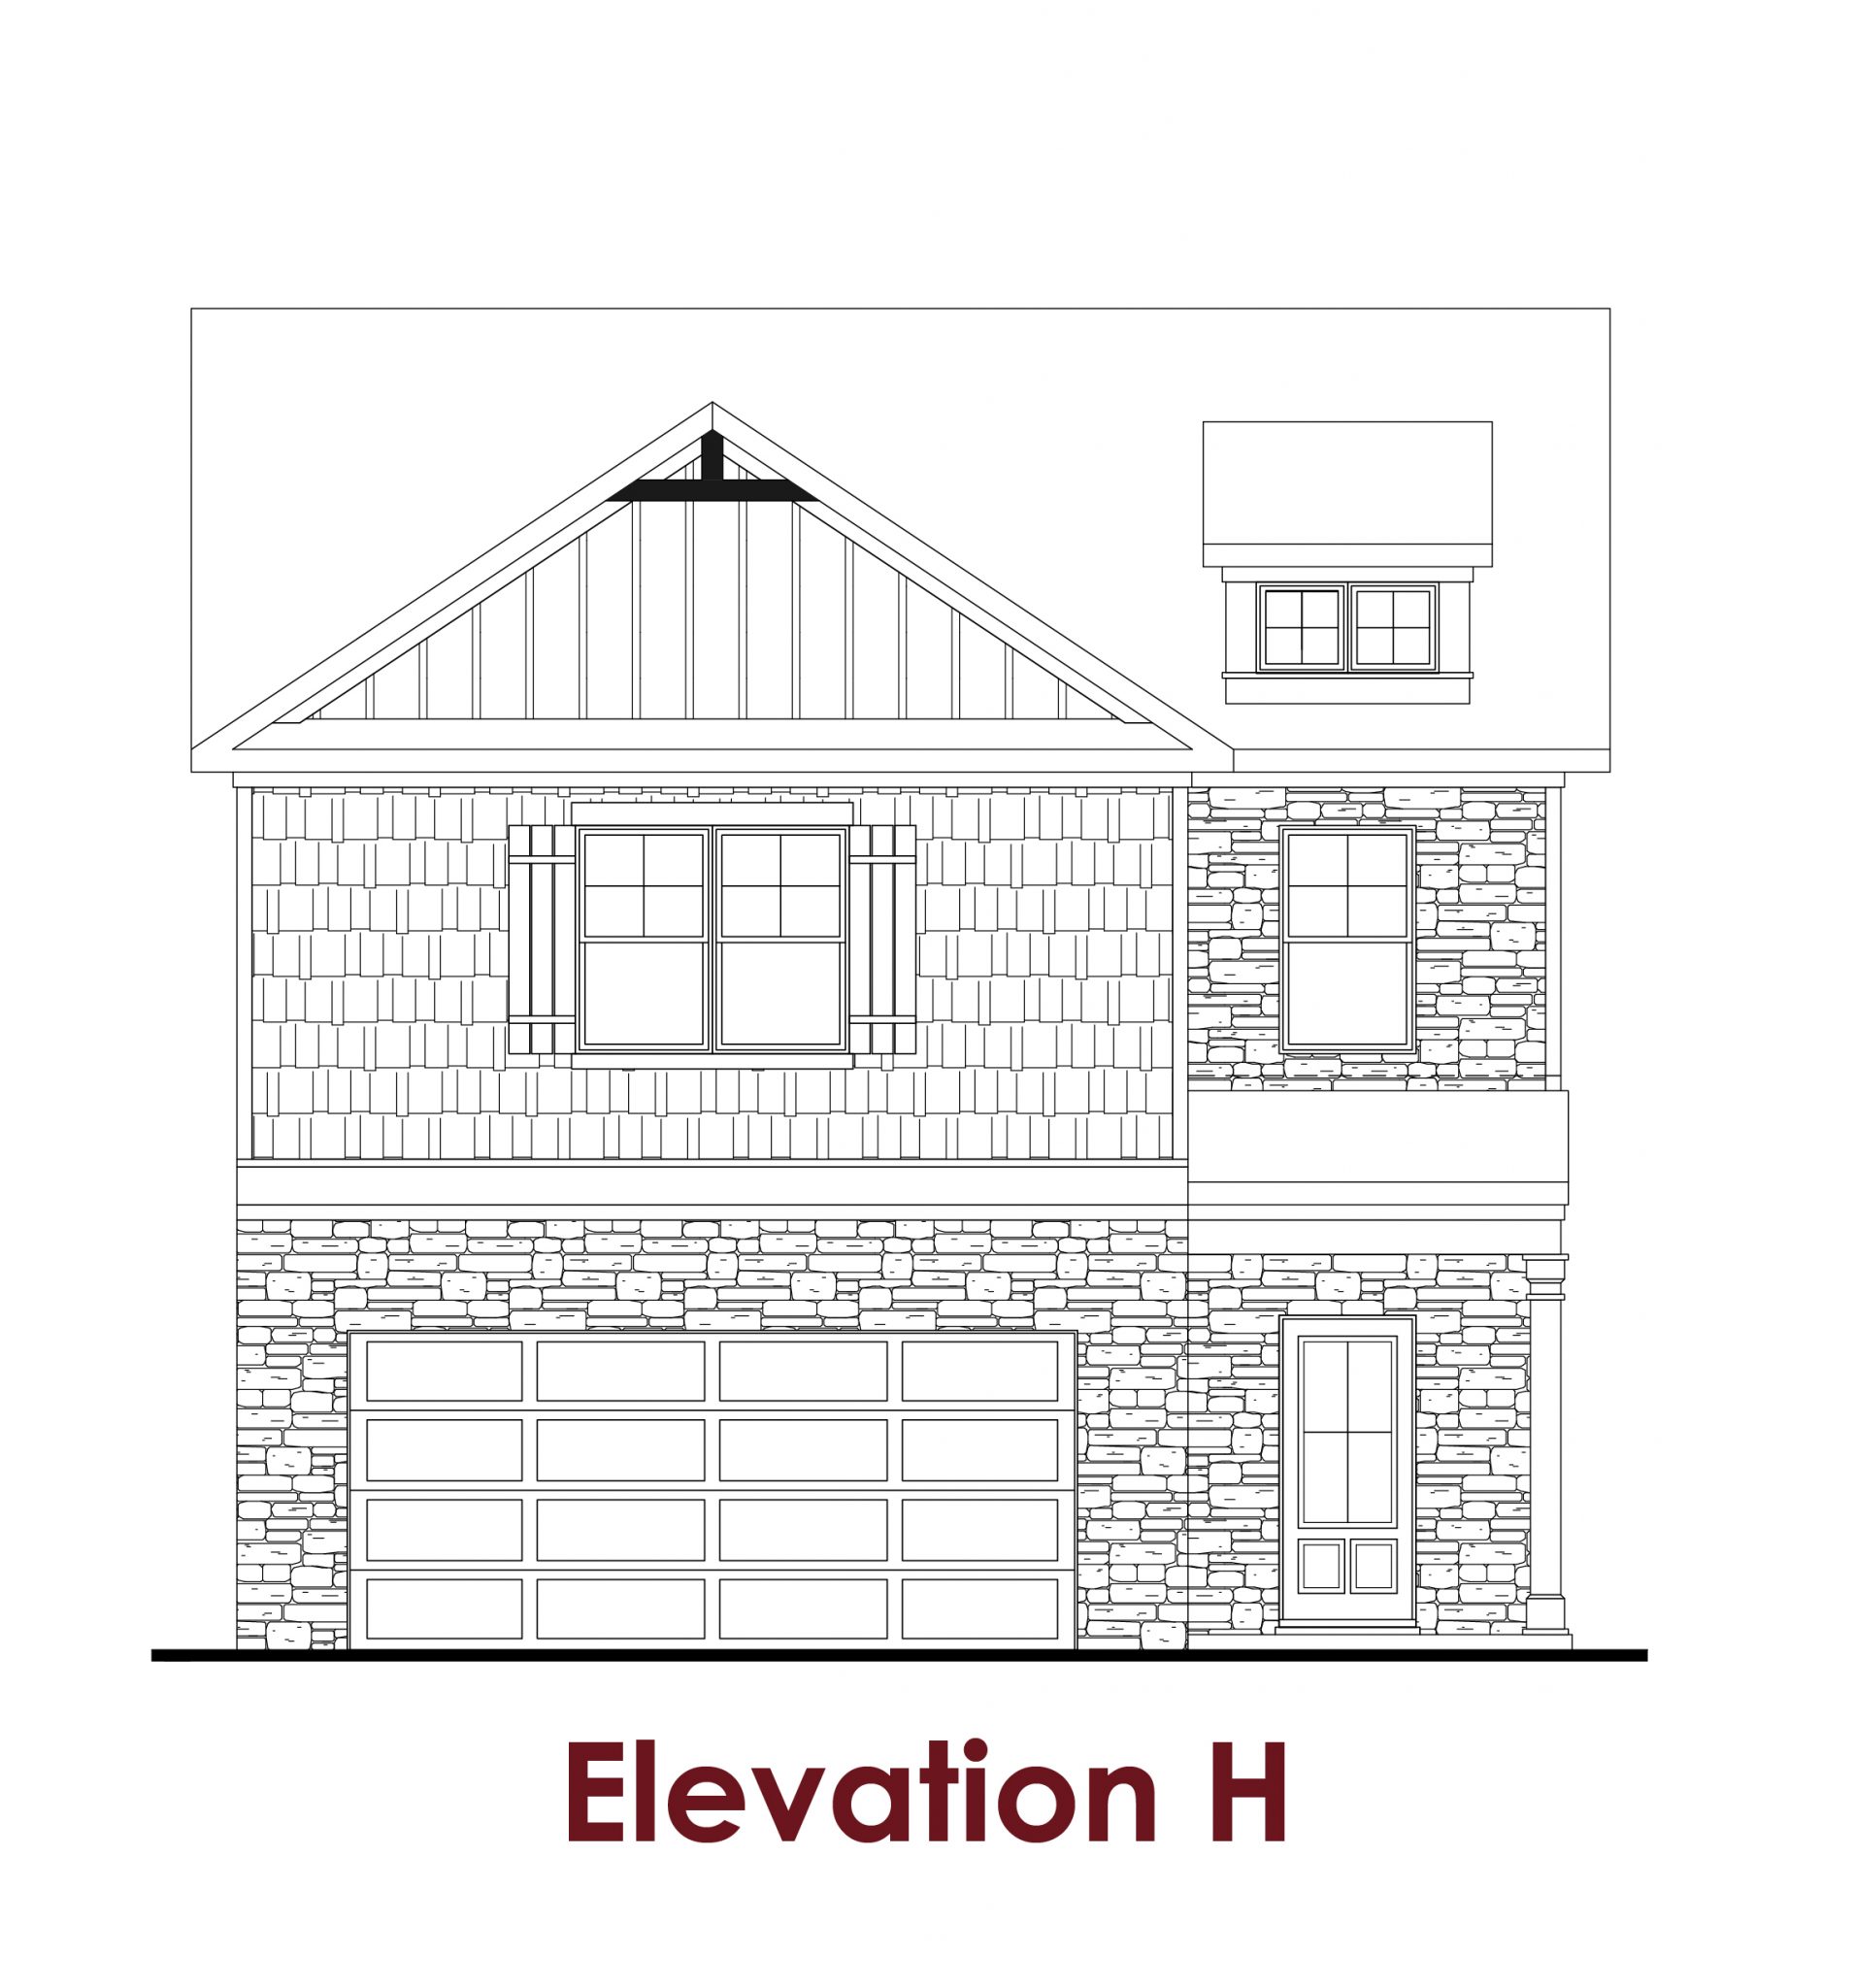 Mayfield elevations Image